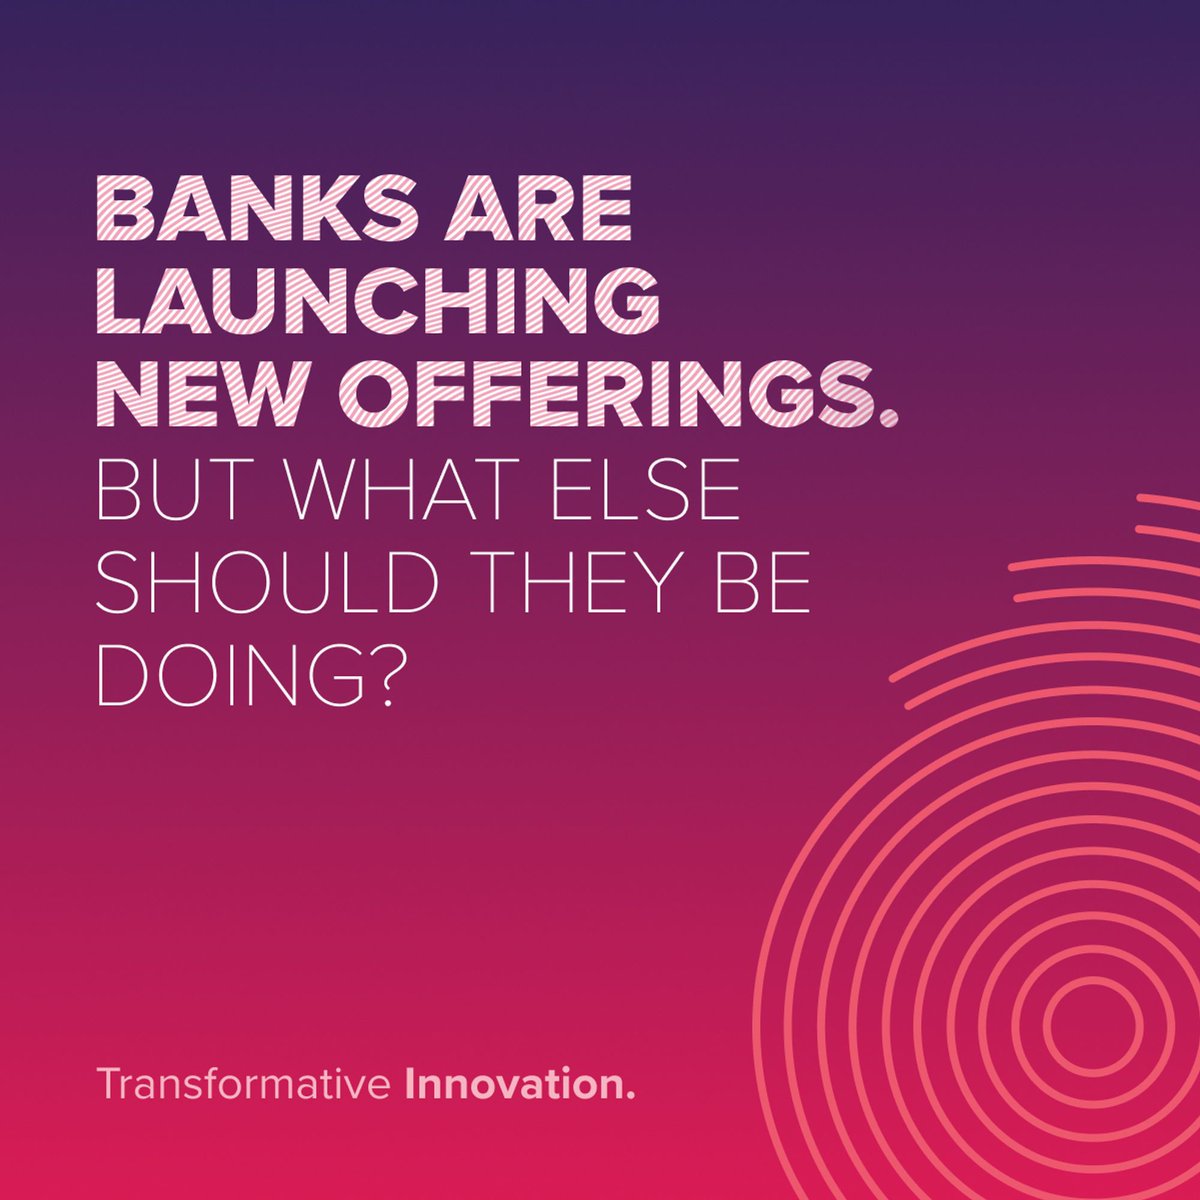 Banks are striving to understand their customers' financial mindsets, developing offerings that are real & relevant. Innovation in customer solutions is one part of the equation, but the real challenge lies in bringing these solutions to market. #SutherlandBFS #FinancialServices